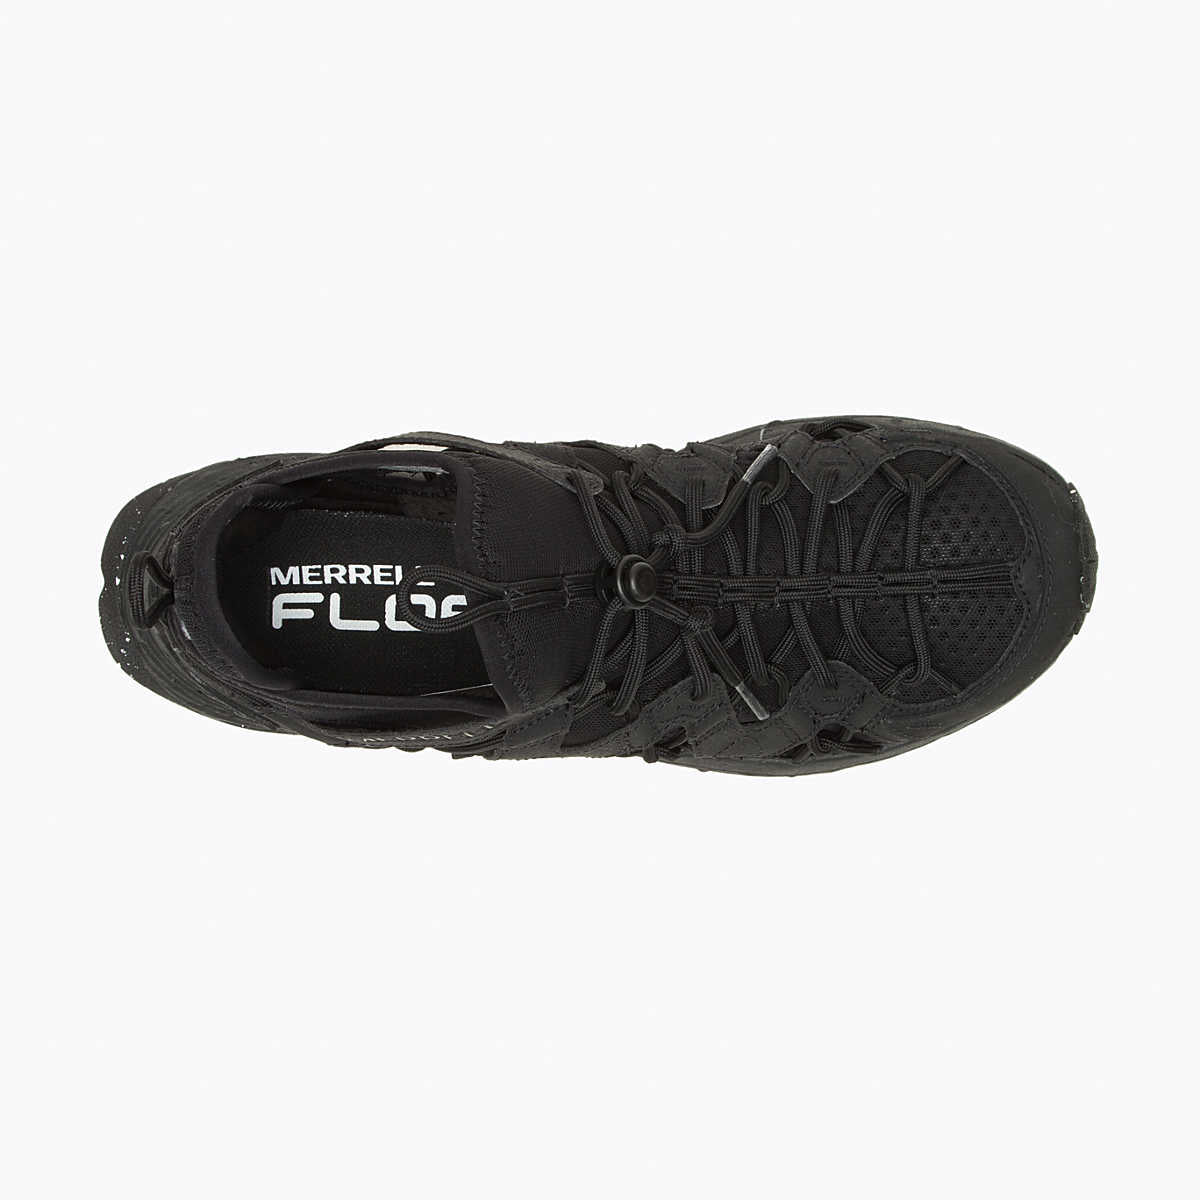 FloatPro Foam™ Midsole - Delivers lightweight cushioning for a comfortable ride.